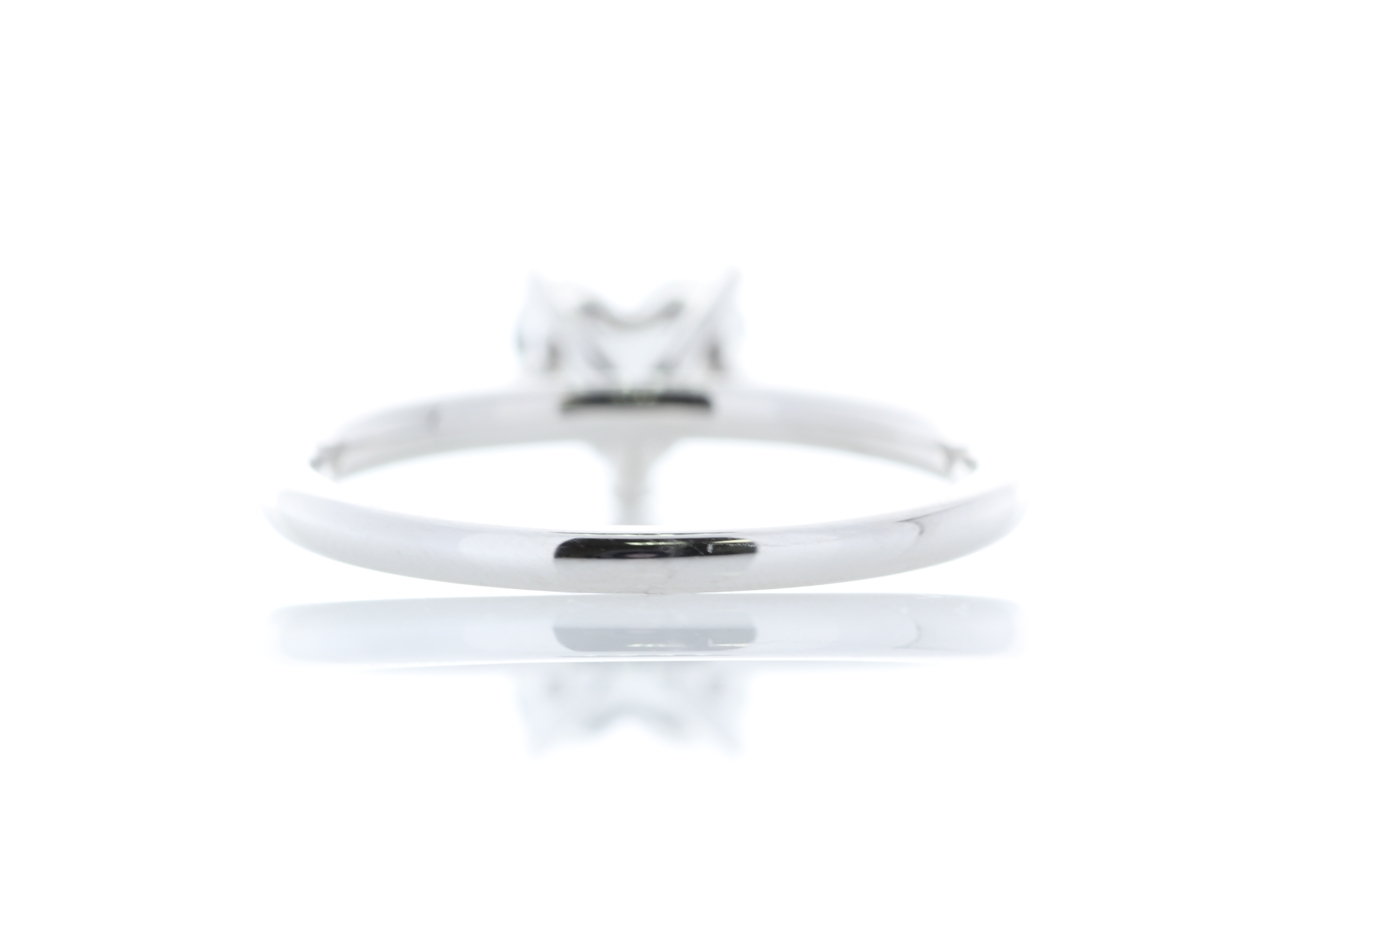 18ct White Gold Single Stone Heart Cut With Stone Set Shoulders Diamond Ring (1.00) 1.17 - Image 3 of 5